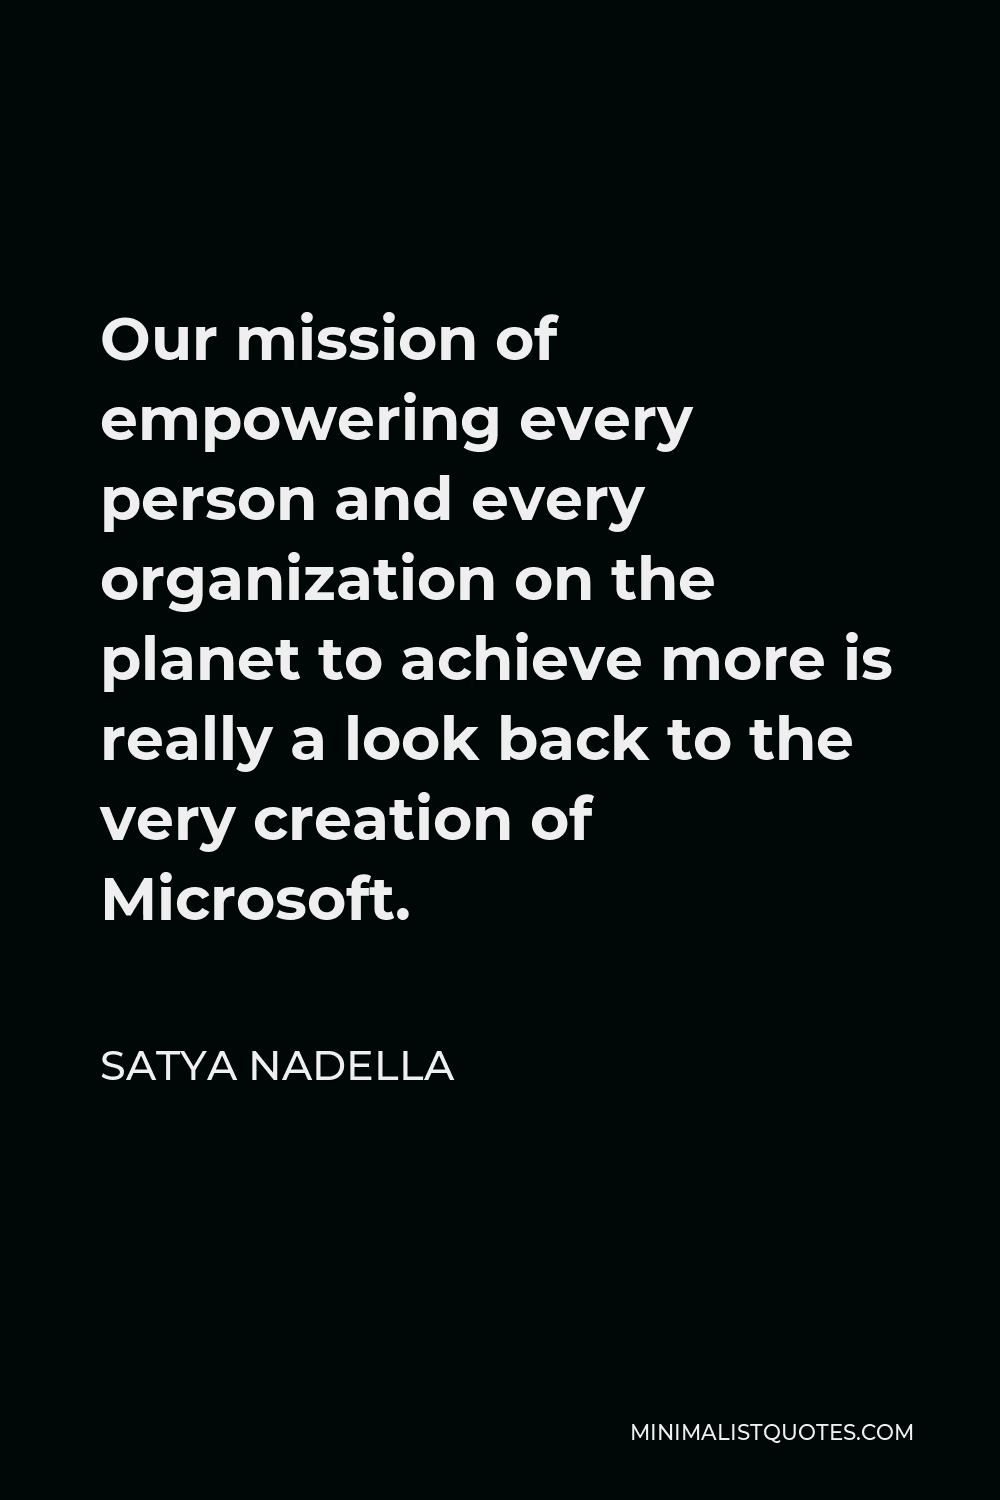 Satya Nadella Quote - Our mission of empowering every person and every organization on the planet to achieve more is really a look back to the very creation of Microsoft.